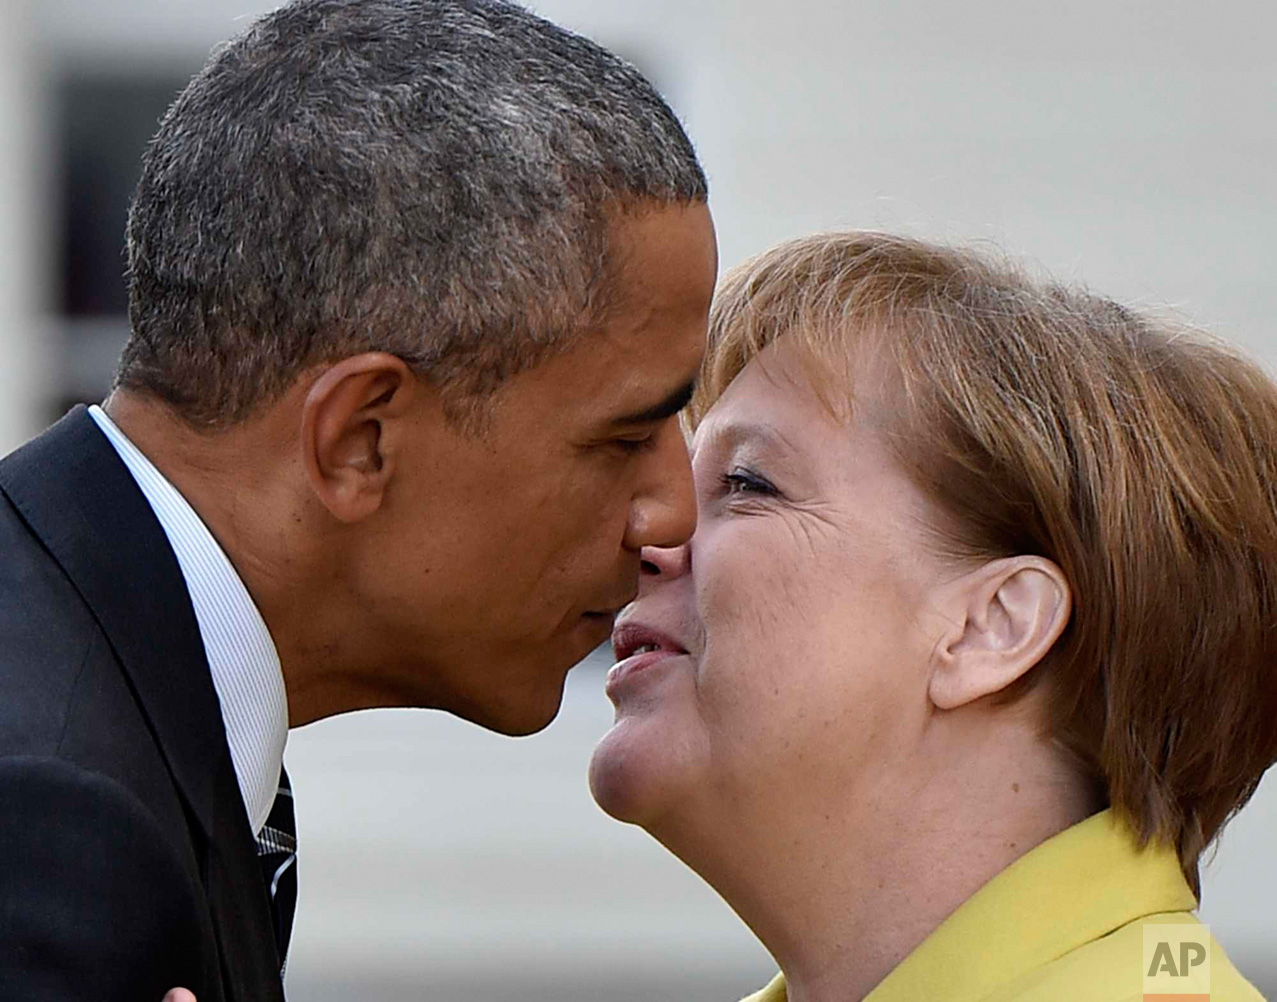  In this Sunday, April 24, 2016 photo, German Chancellor Angela Merkel, right, welcomes U.S. President Barack Obama at Herrenhaus Palace in Hannover, northern Germany. Obama is on a two-day official visit to Germany. (AP Photo/Martin Meissner) 